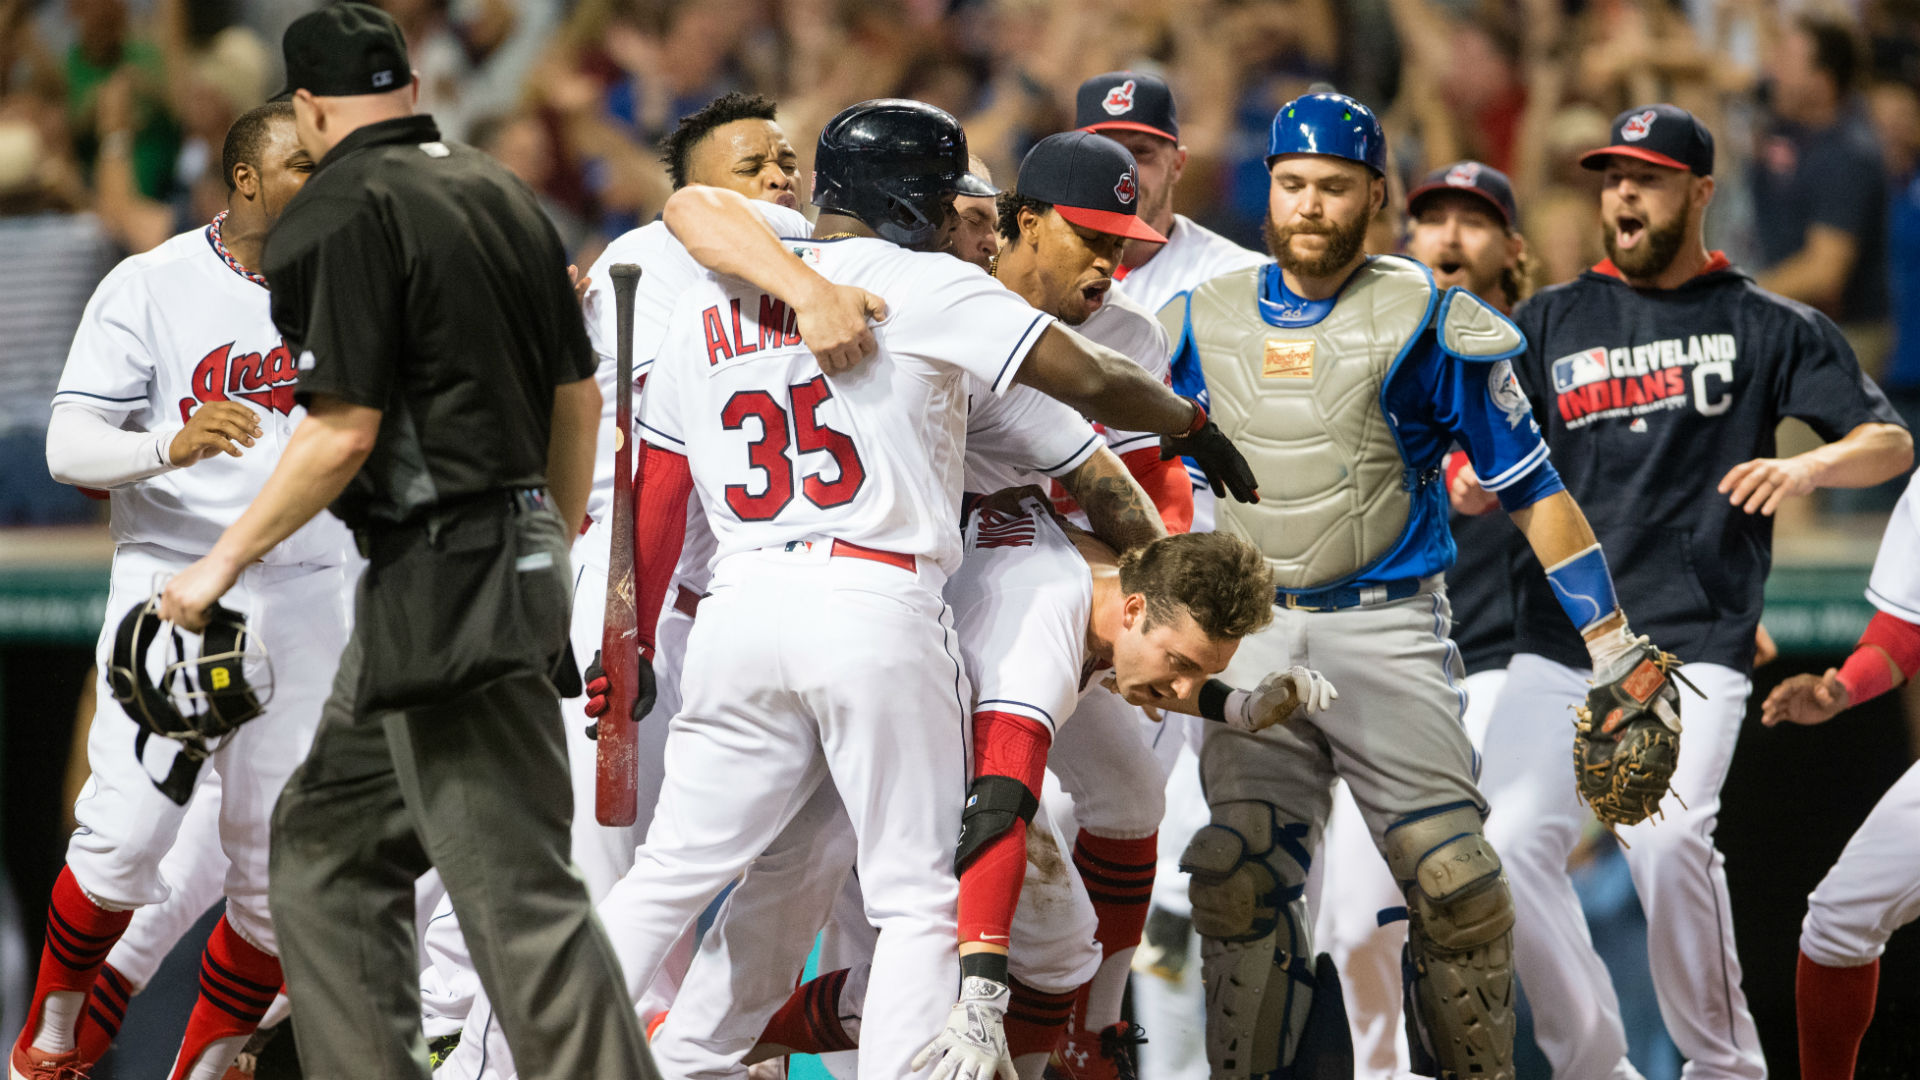 Inside-the-park homer sends Indians to second straight walk-off win ...